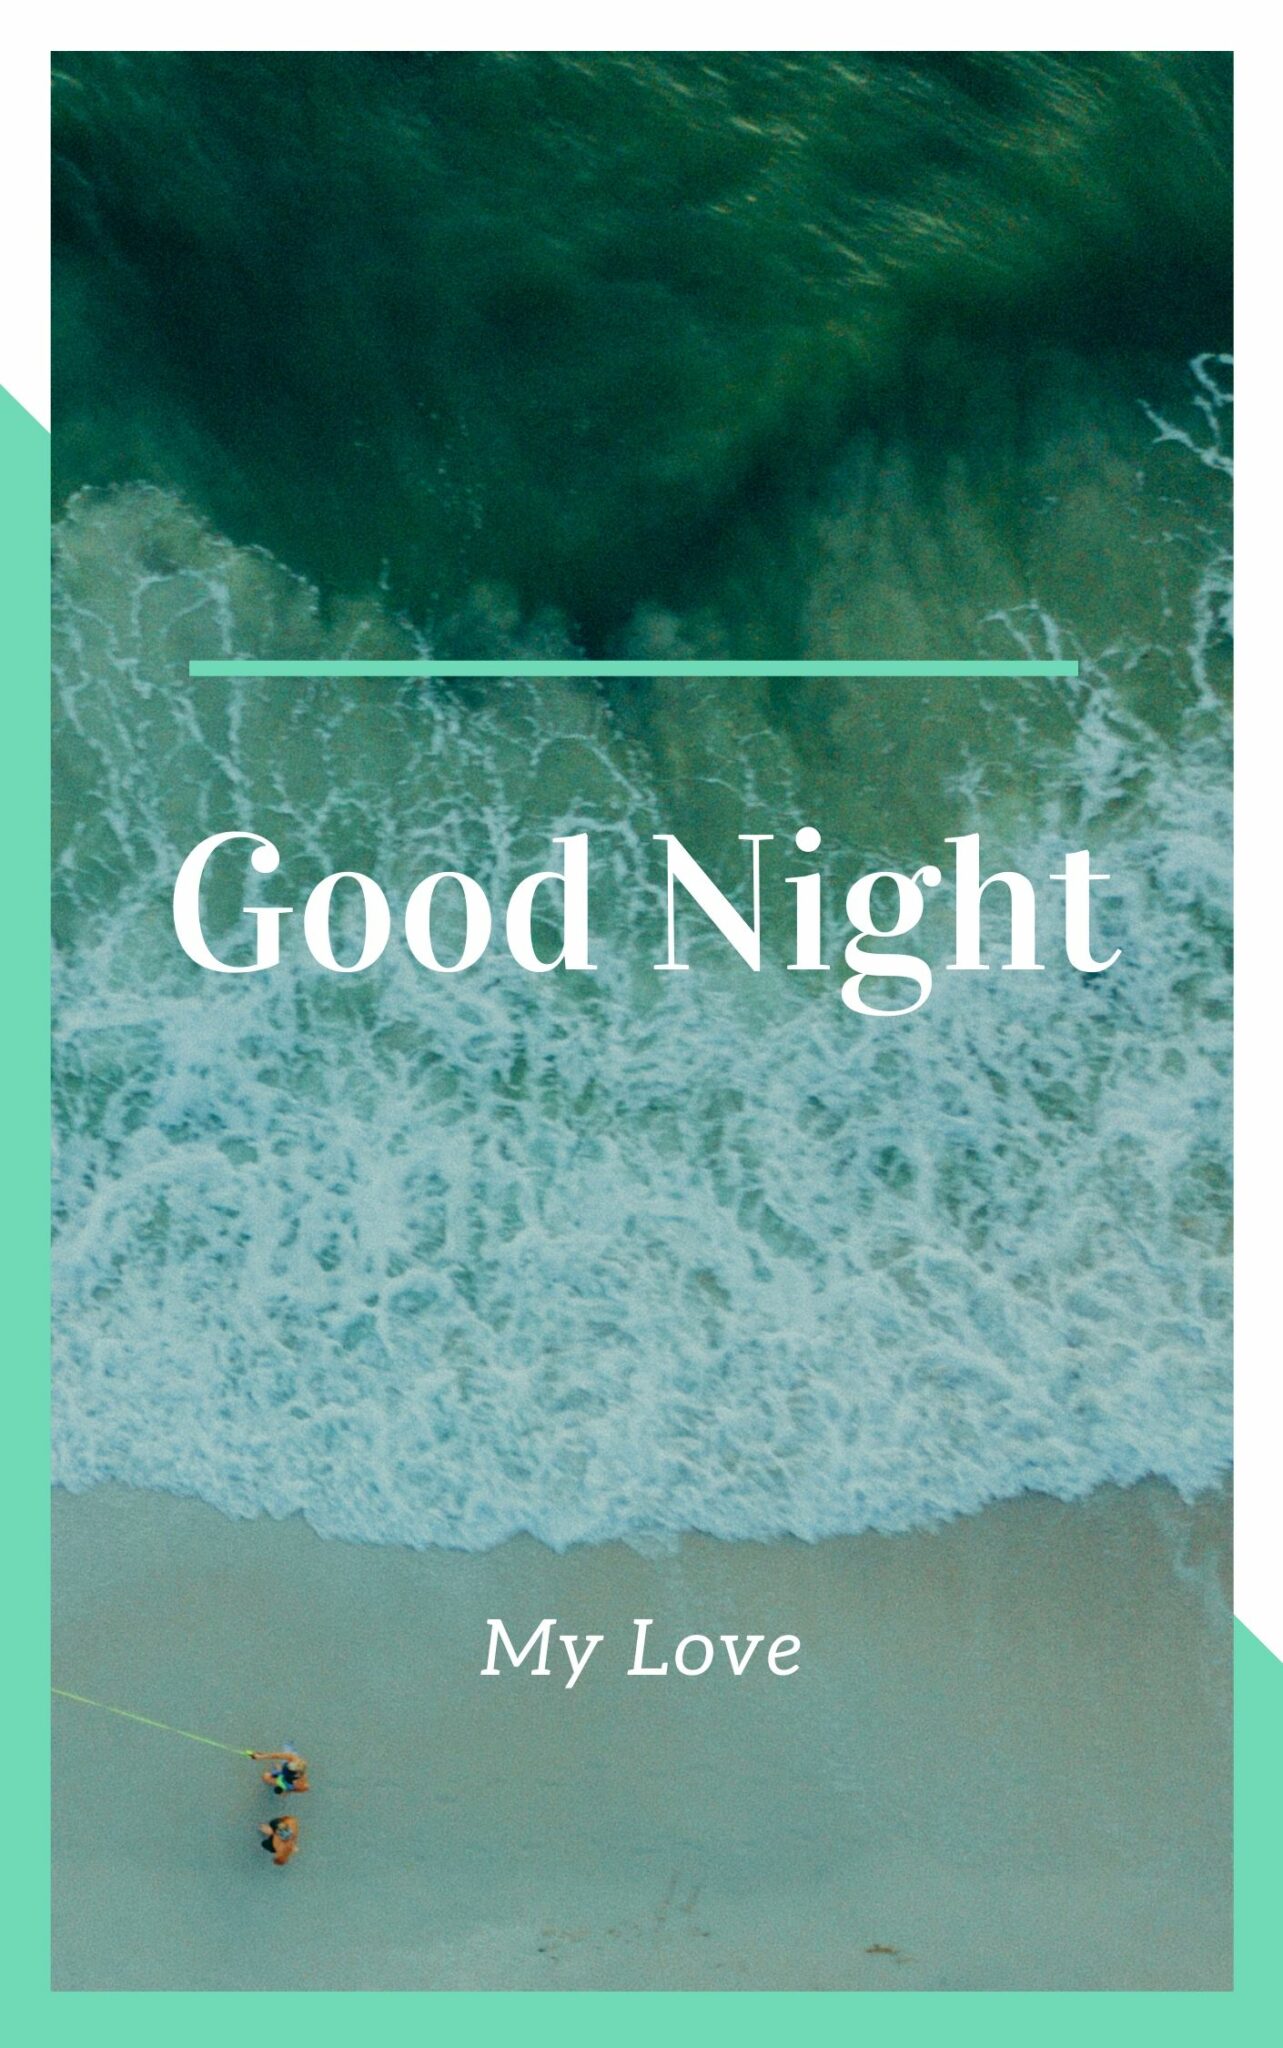 🔥 Good Night My Love photo hd Download free - Images SRkh